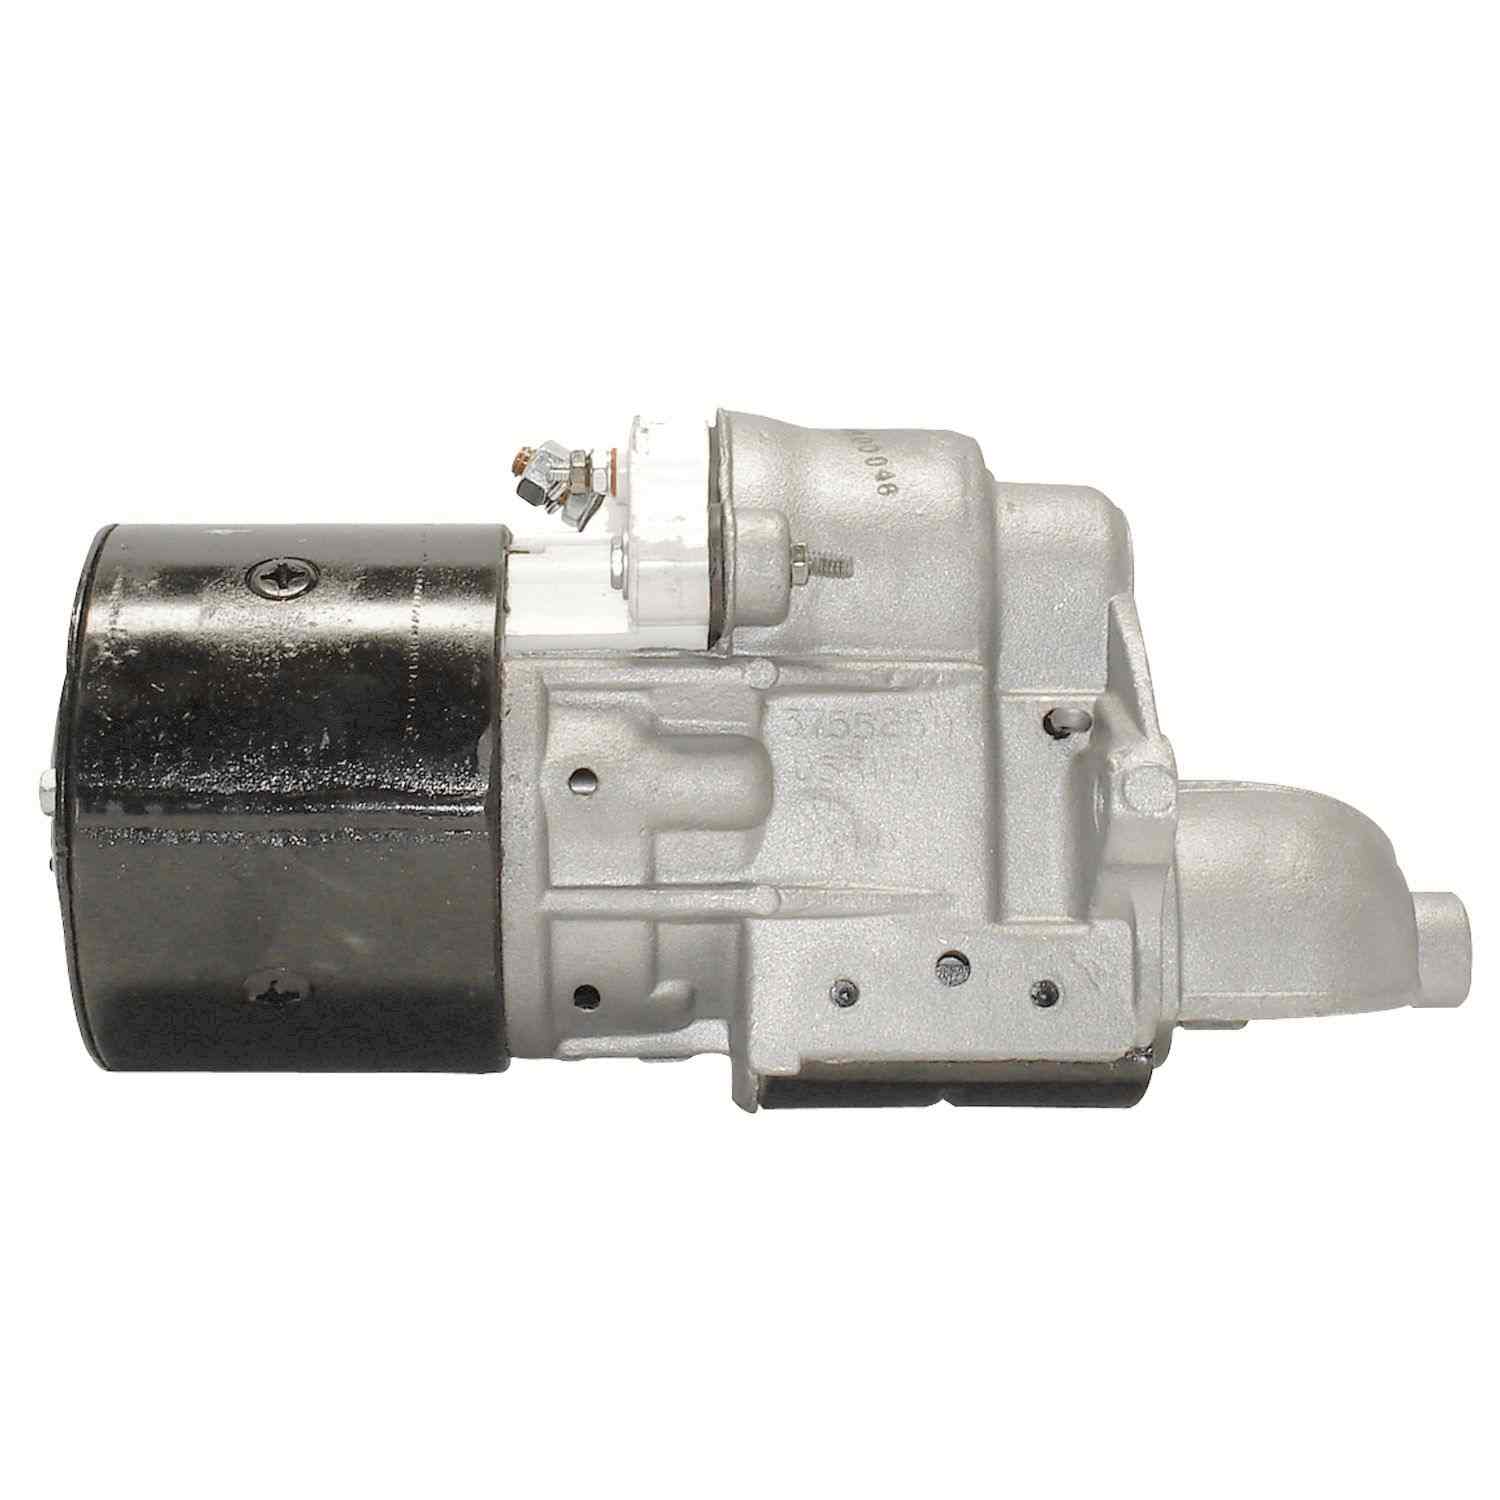 ACDELCO GOLD/PROFESSIONAL - Reman Starter Motor - DCC 336-1043